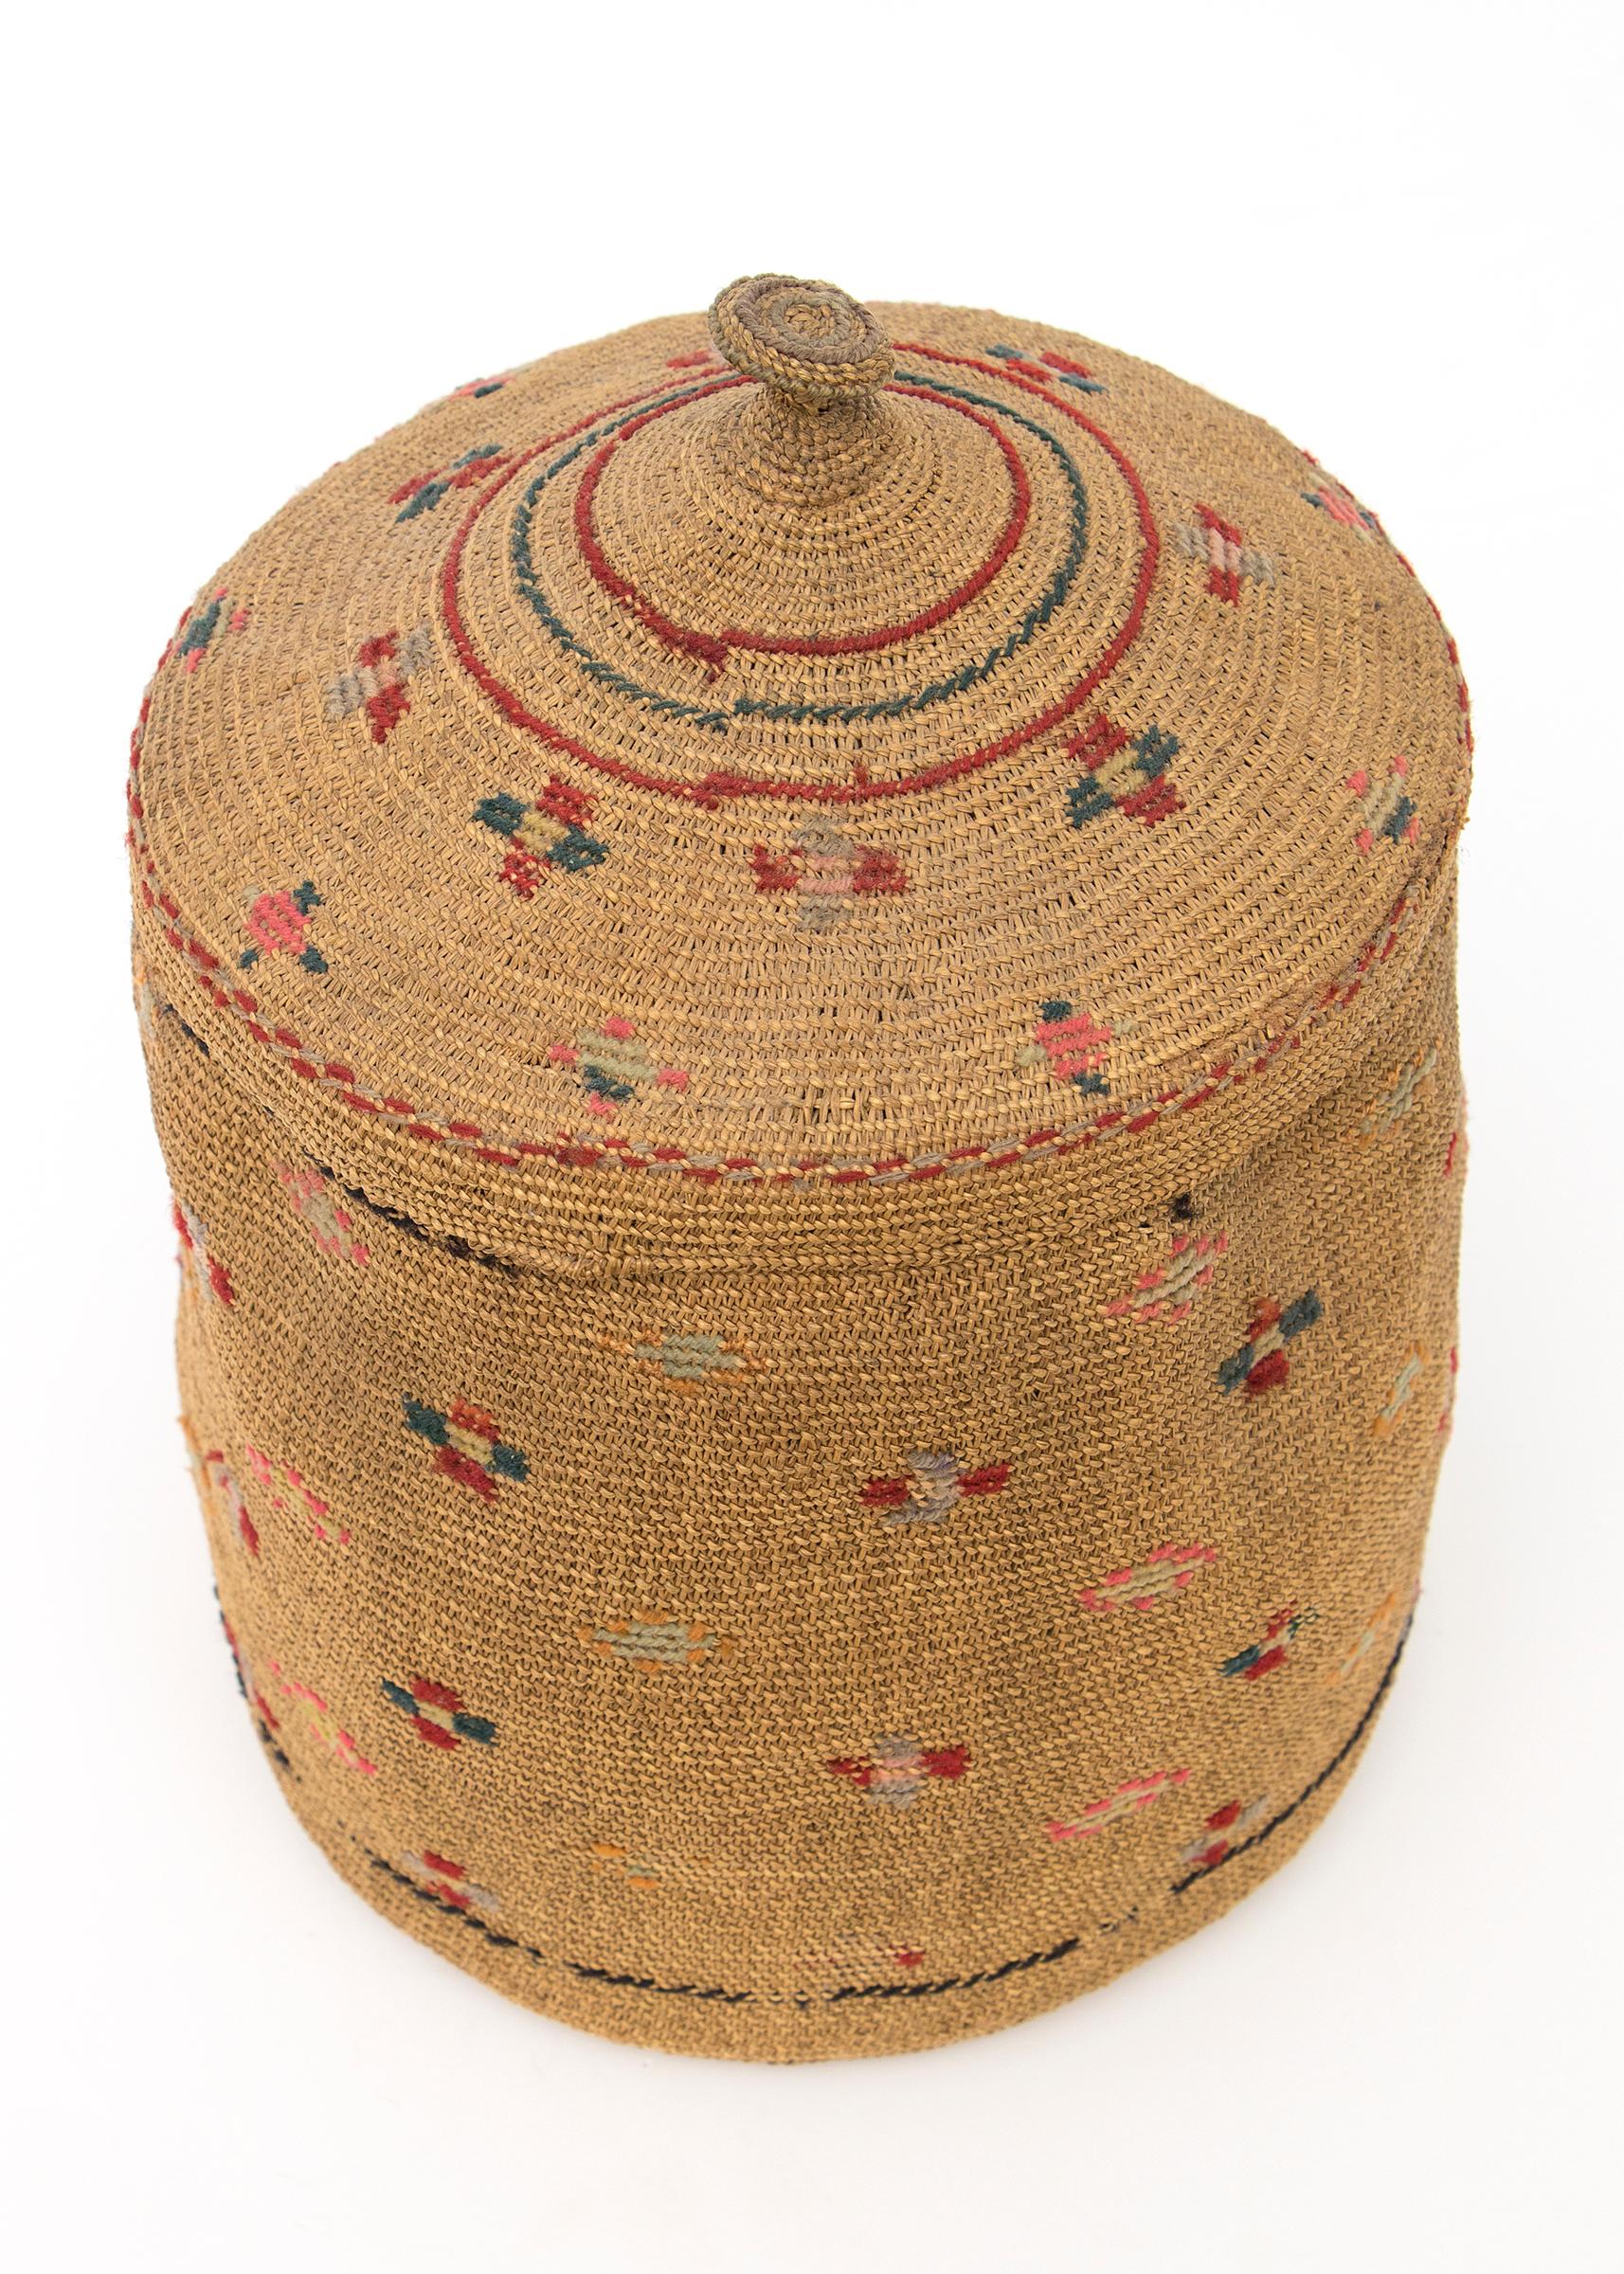 Northwest Coast 1900 Woven Basket with Top, Multicolor Cross Patterns, Table Top In Good Condition For Sale In Denver, CO